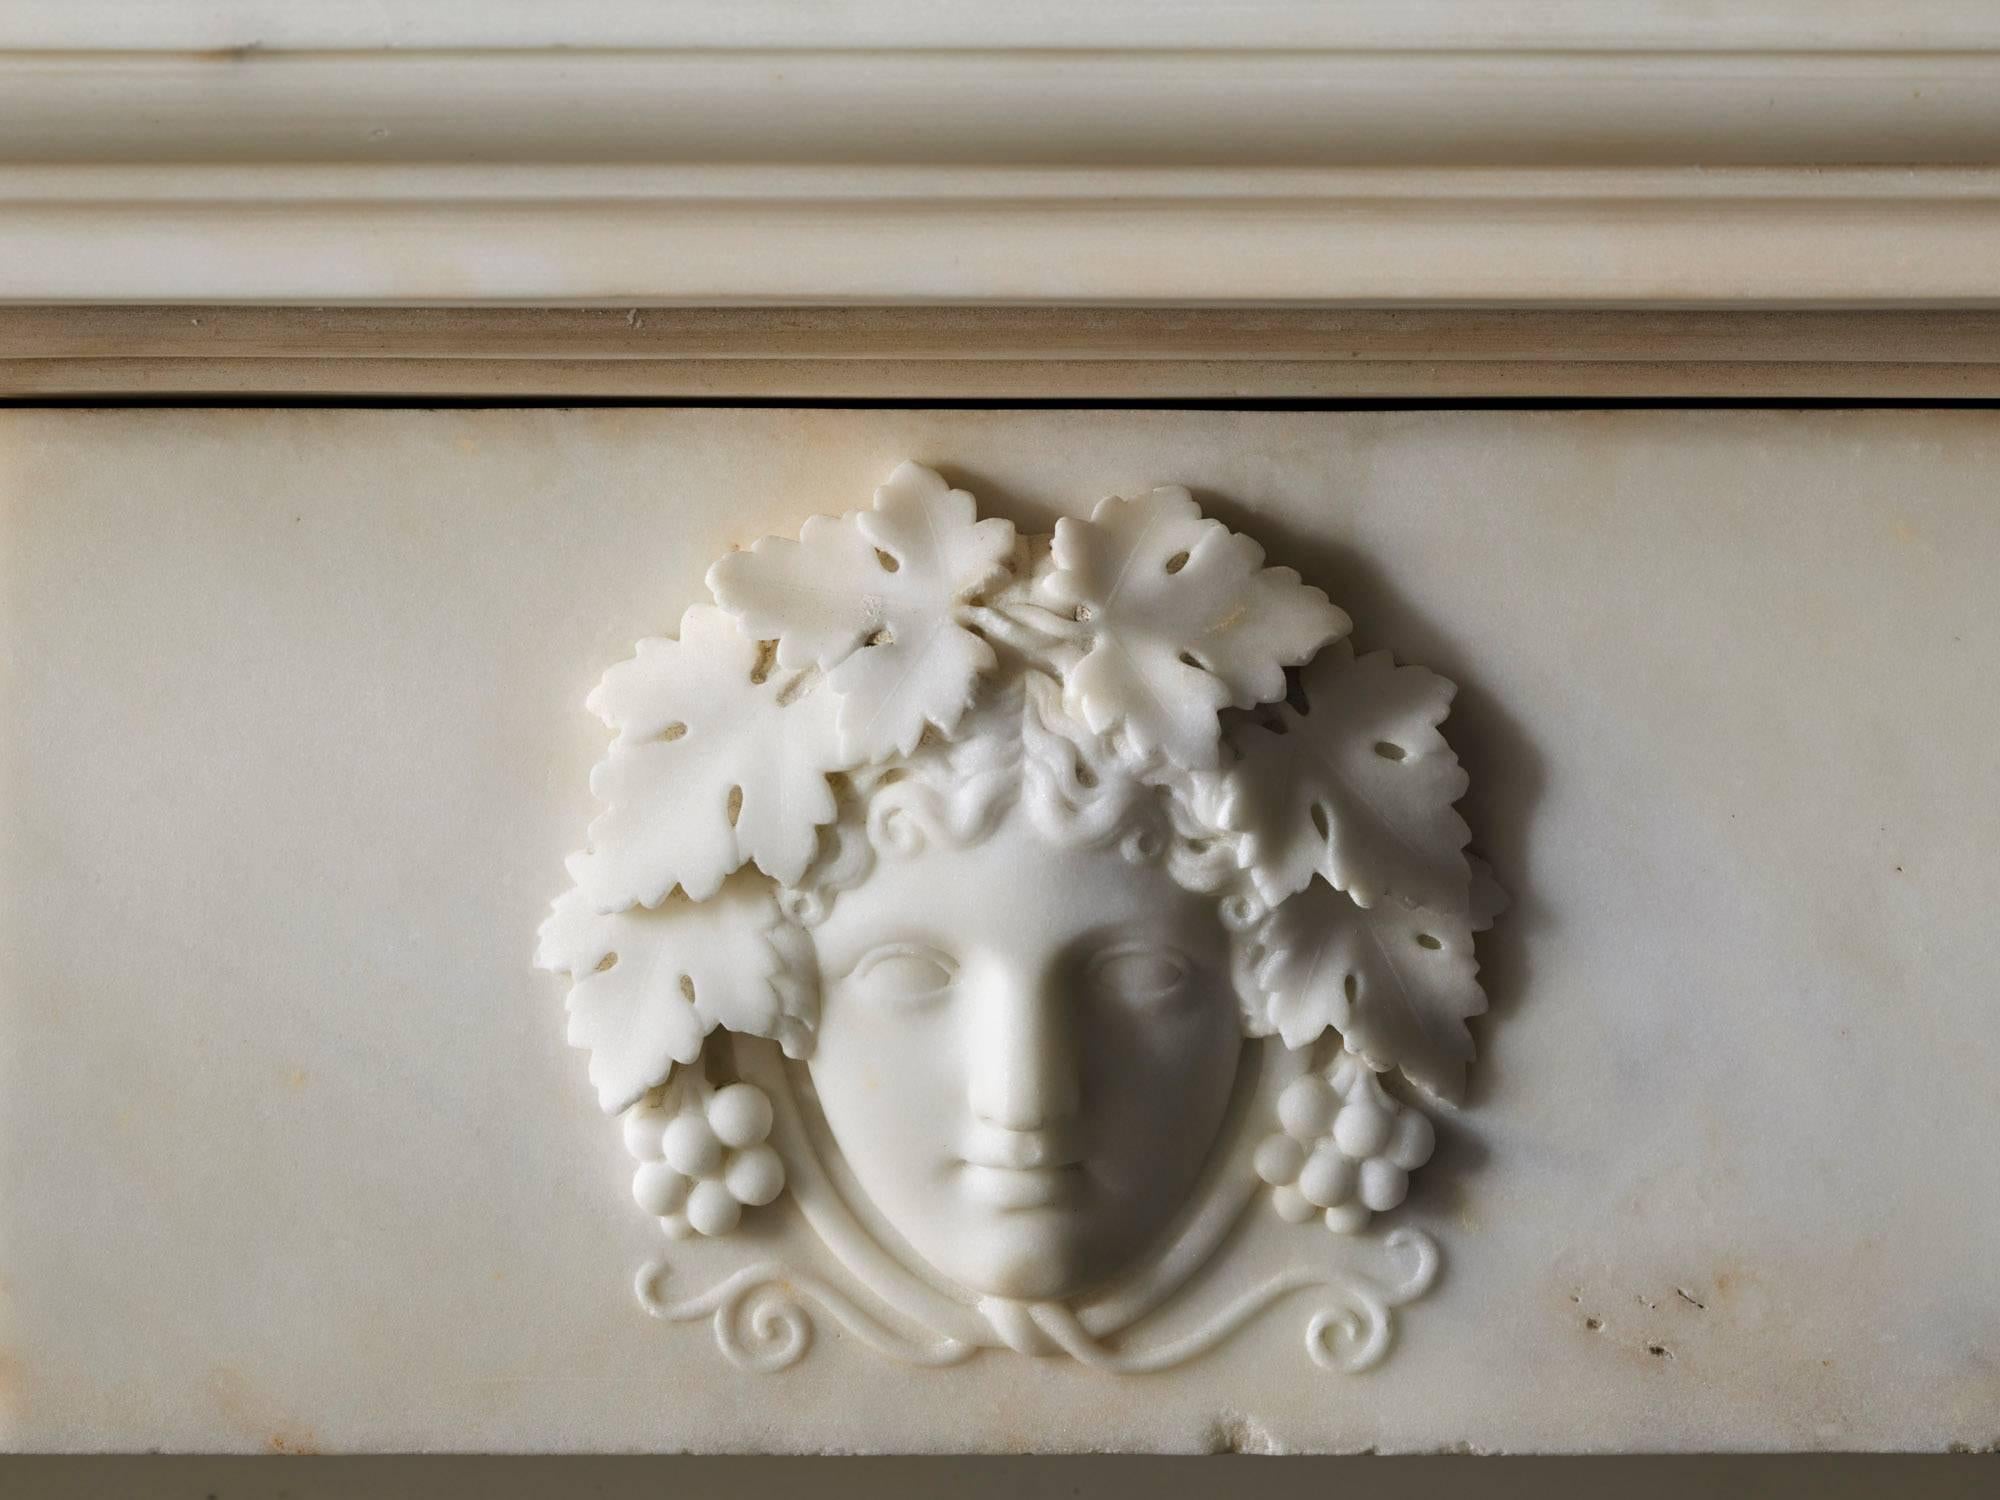 An exceptional English Regency antique chimneypiece, circa 1820. Carved in fine, white statuary marble with full fluted columns with Corinthian capitals. The frieze is carved with ovoid floral bosses on either side of a beautifully carved center